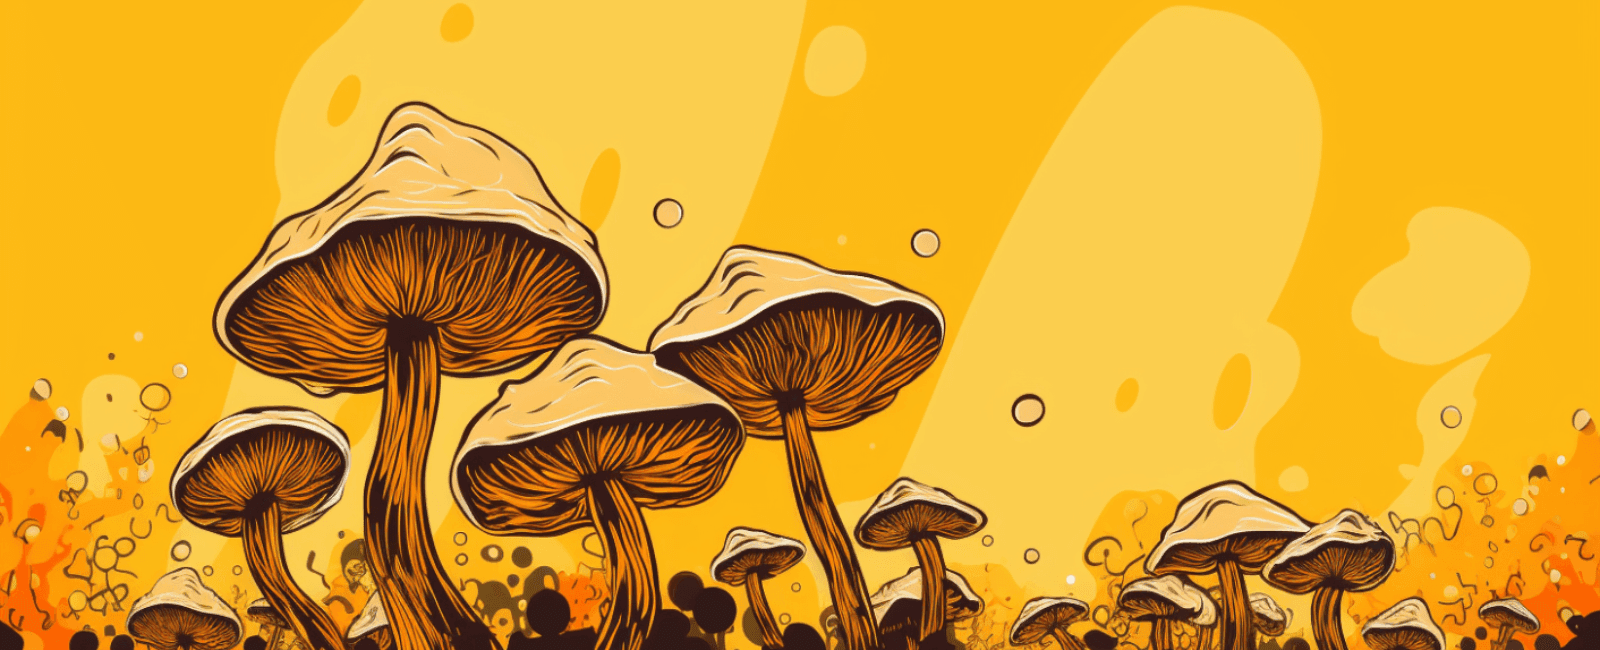 Psilocybin Therapy May Be an Effective Treatment for Anorexia, According to Recent Study